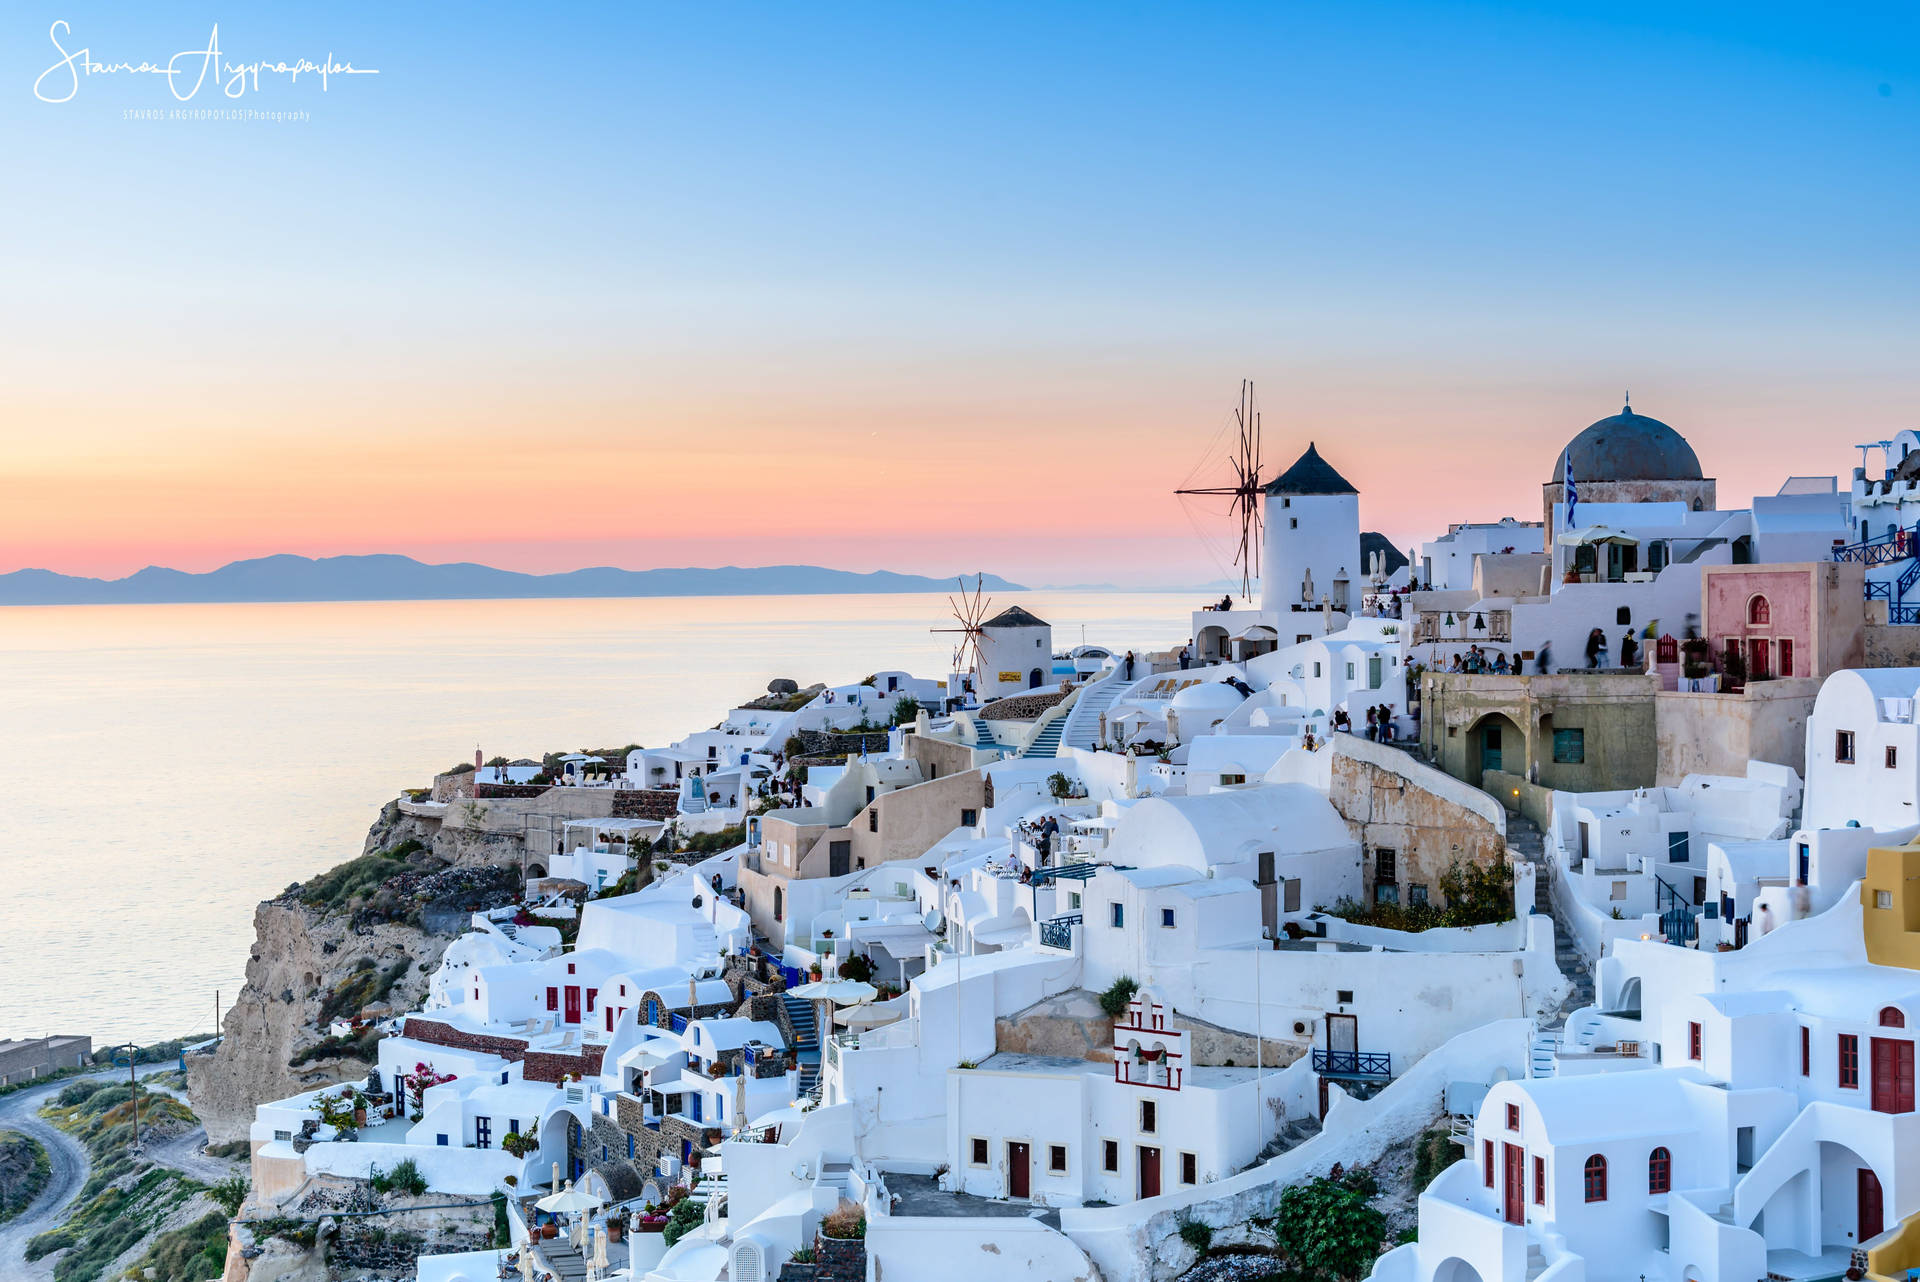 Greece 6016X4016 Wallpaper and Background Image